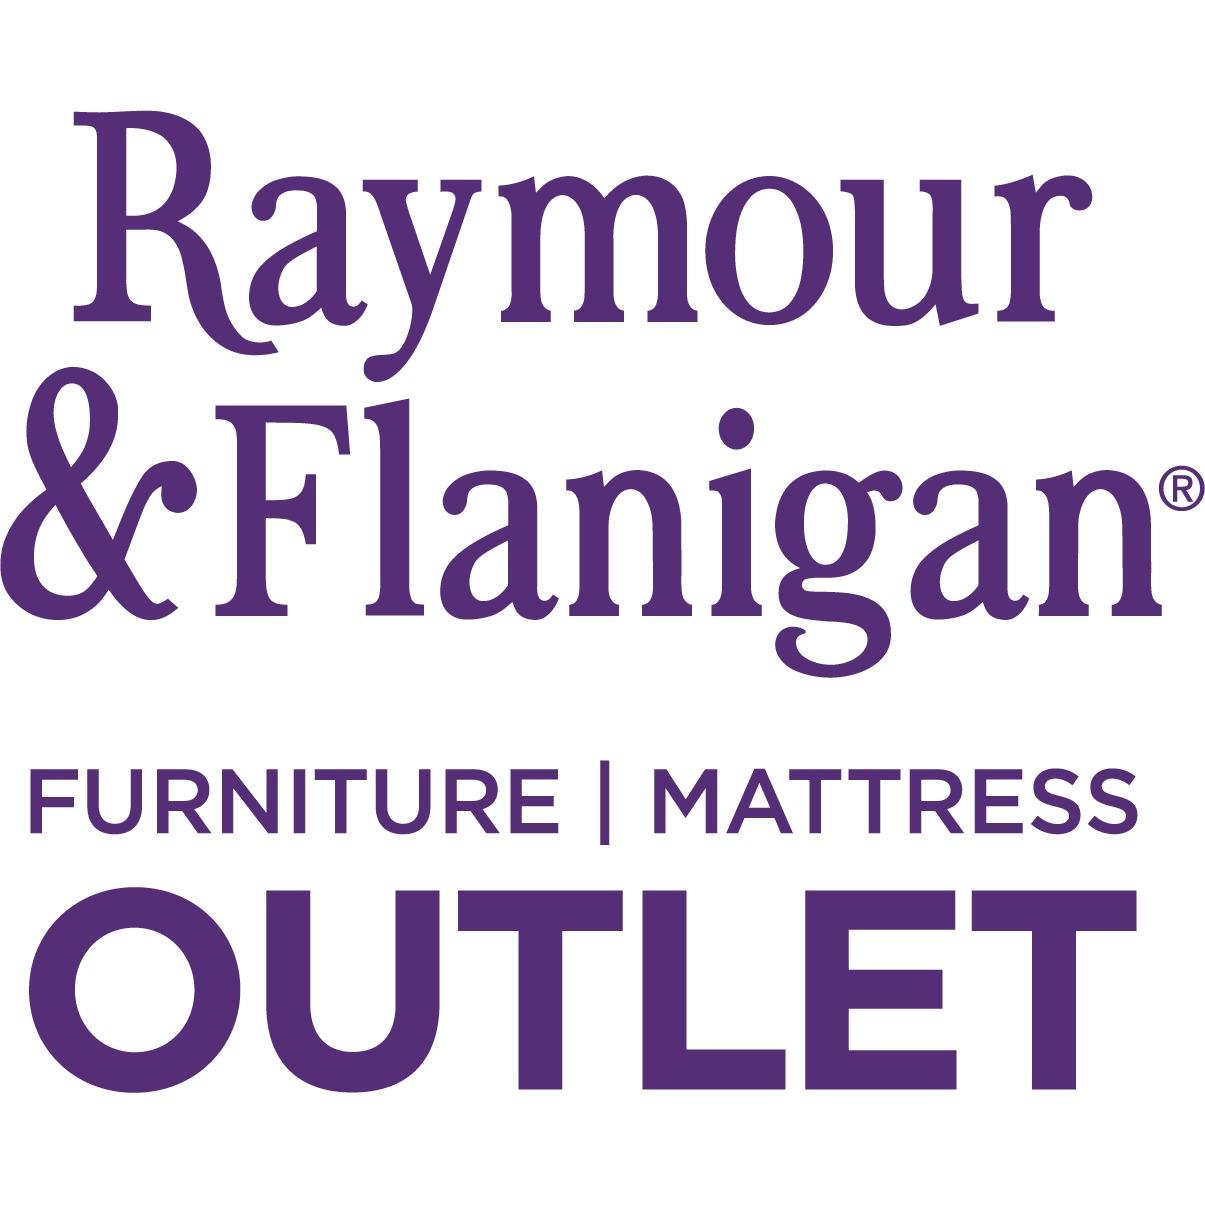 Raymour & Flanigan Furniture and Mattress Outlet | 250 E Route 4, Paramus, NJ, 07652 | +1 (551) 228-7200